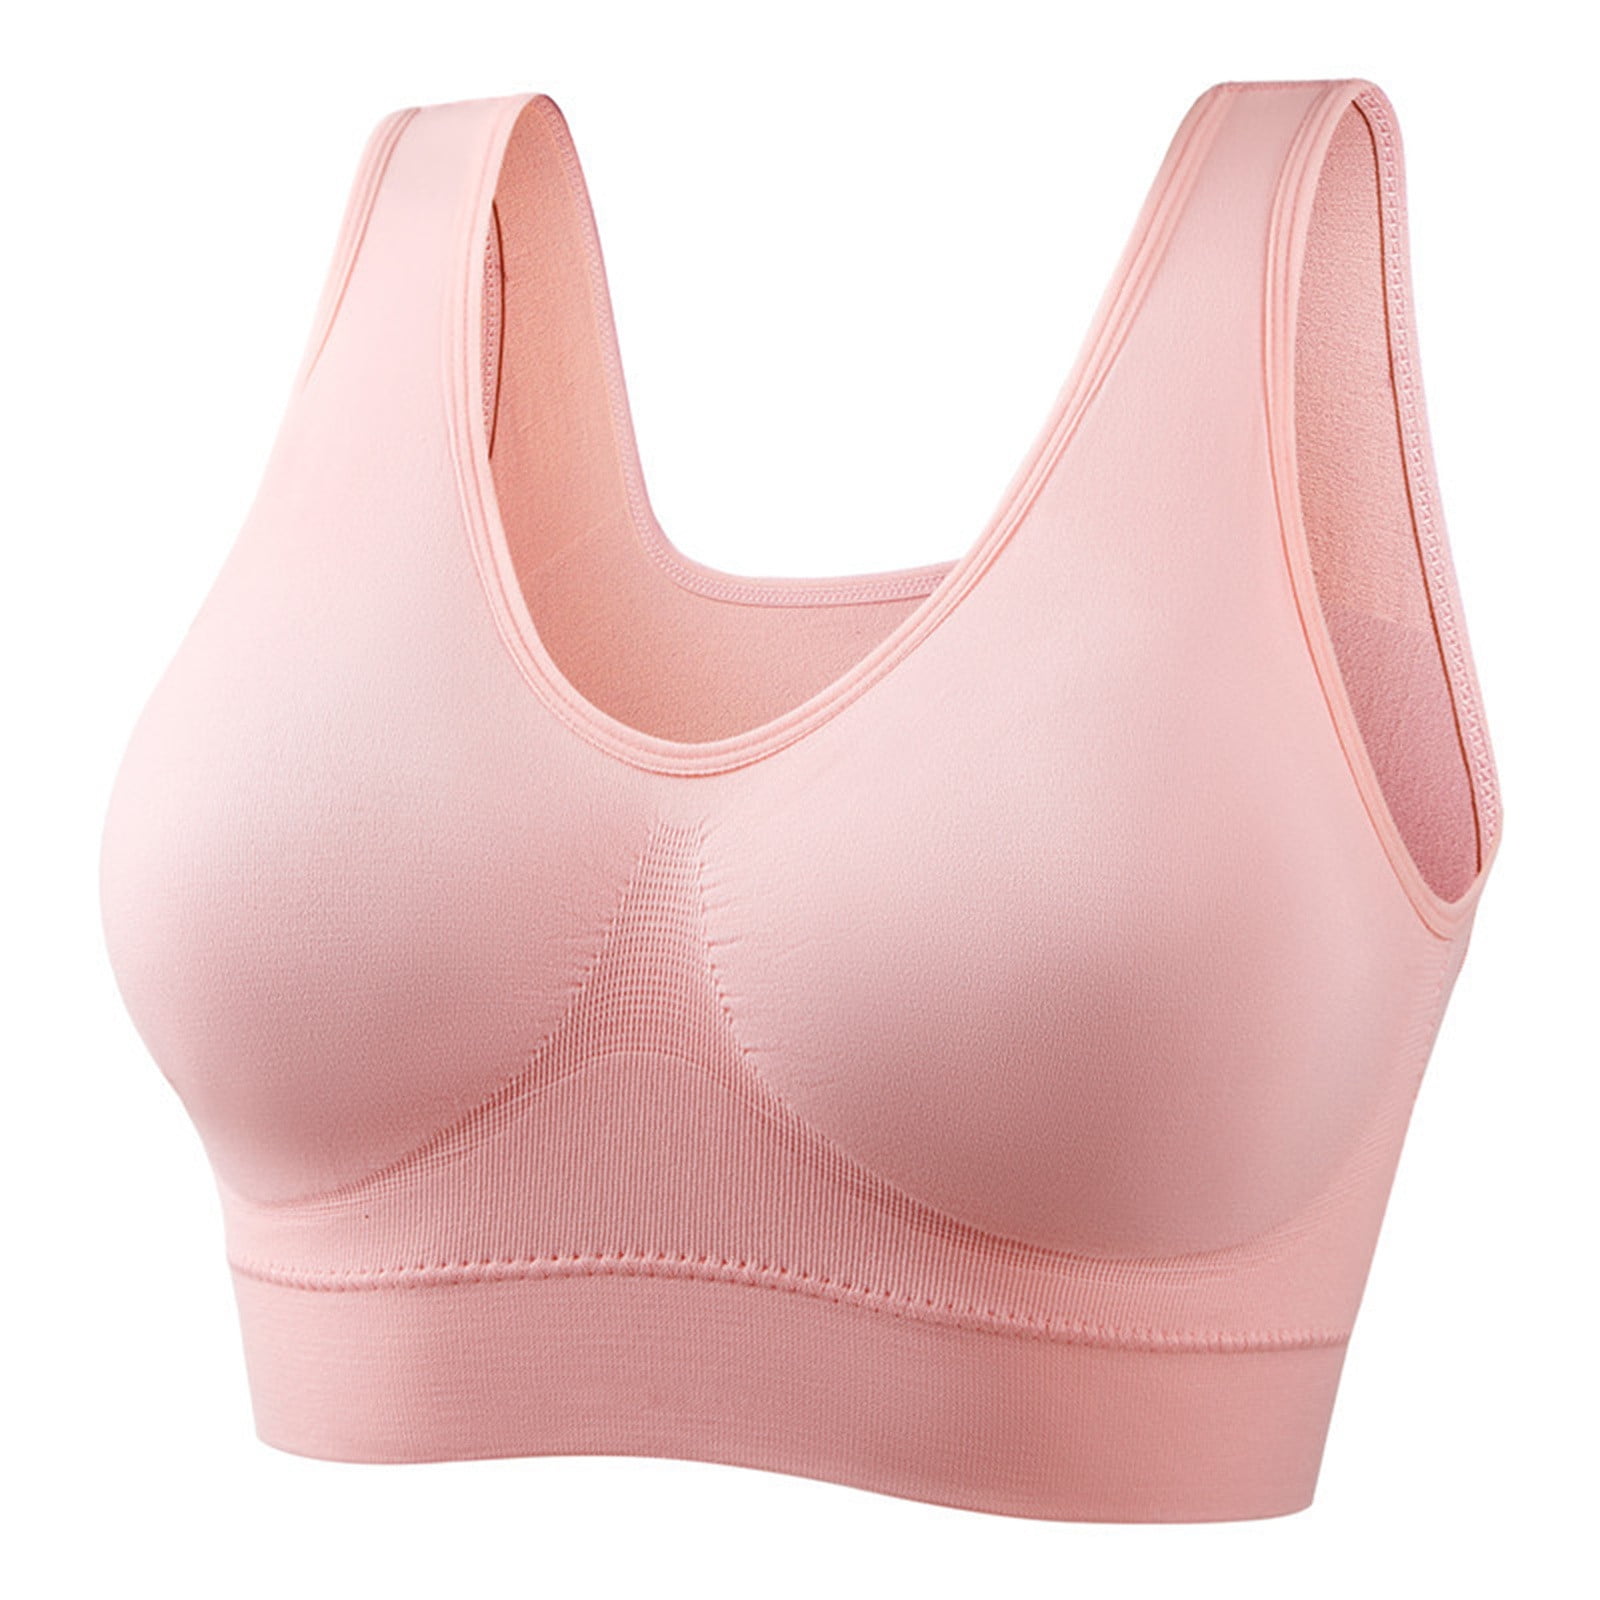 KDDYLITQ Sports Bras for Women High Support Padded Support